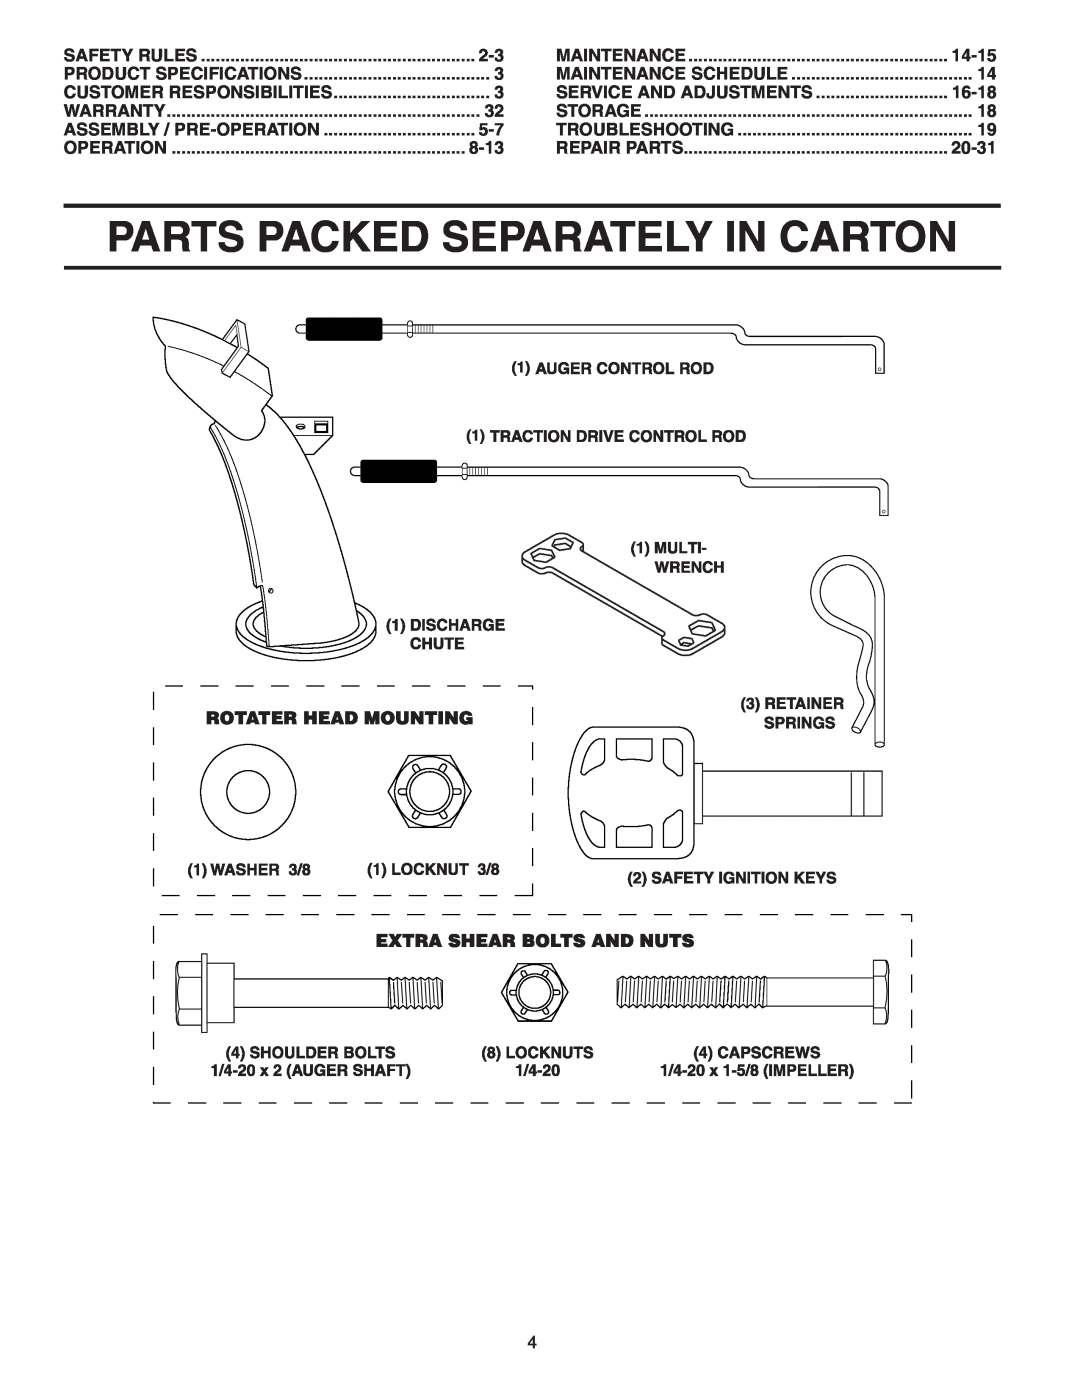 Poulan 187881 Parts Packed Separately In Carton, 8-13, 14-15, Service And Adjustments, 16-18, 20-31, Safety Rules, Storage 